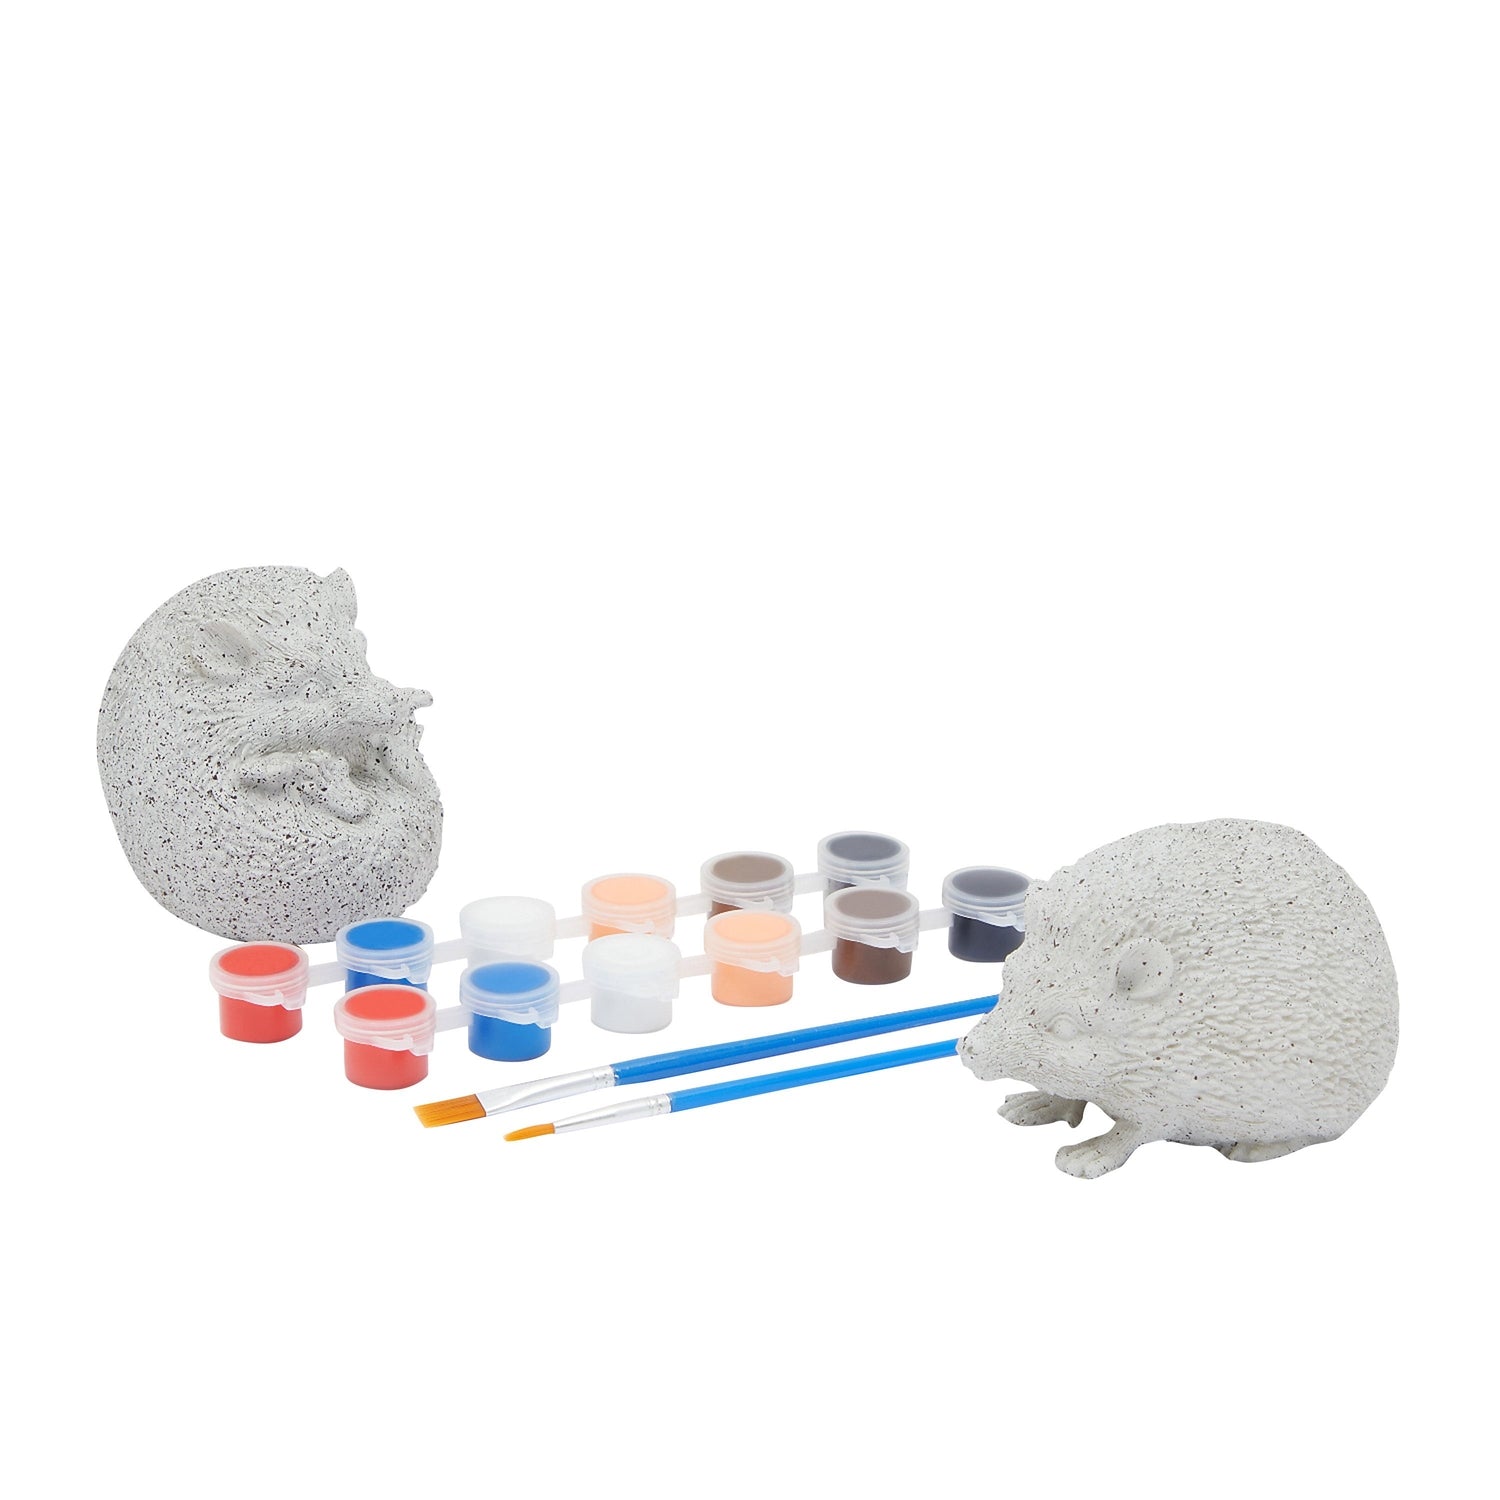 Hedgehog Rock Painting Kit for Adults and Kids, DIY Ceramic Crafts Figurines with Brushes, Paint Strips, 16 Pieces, Size: 3 x 3.25 x 3